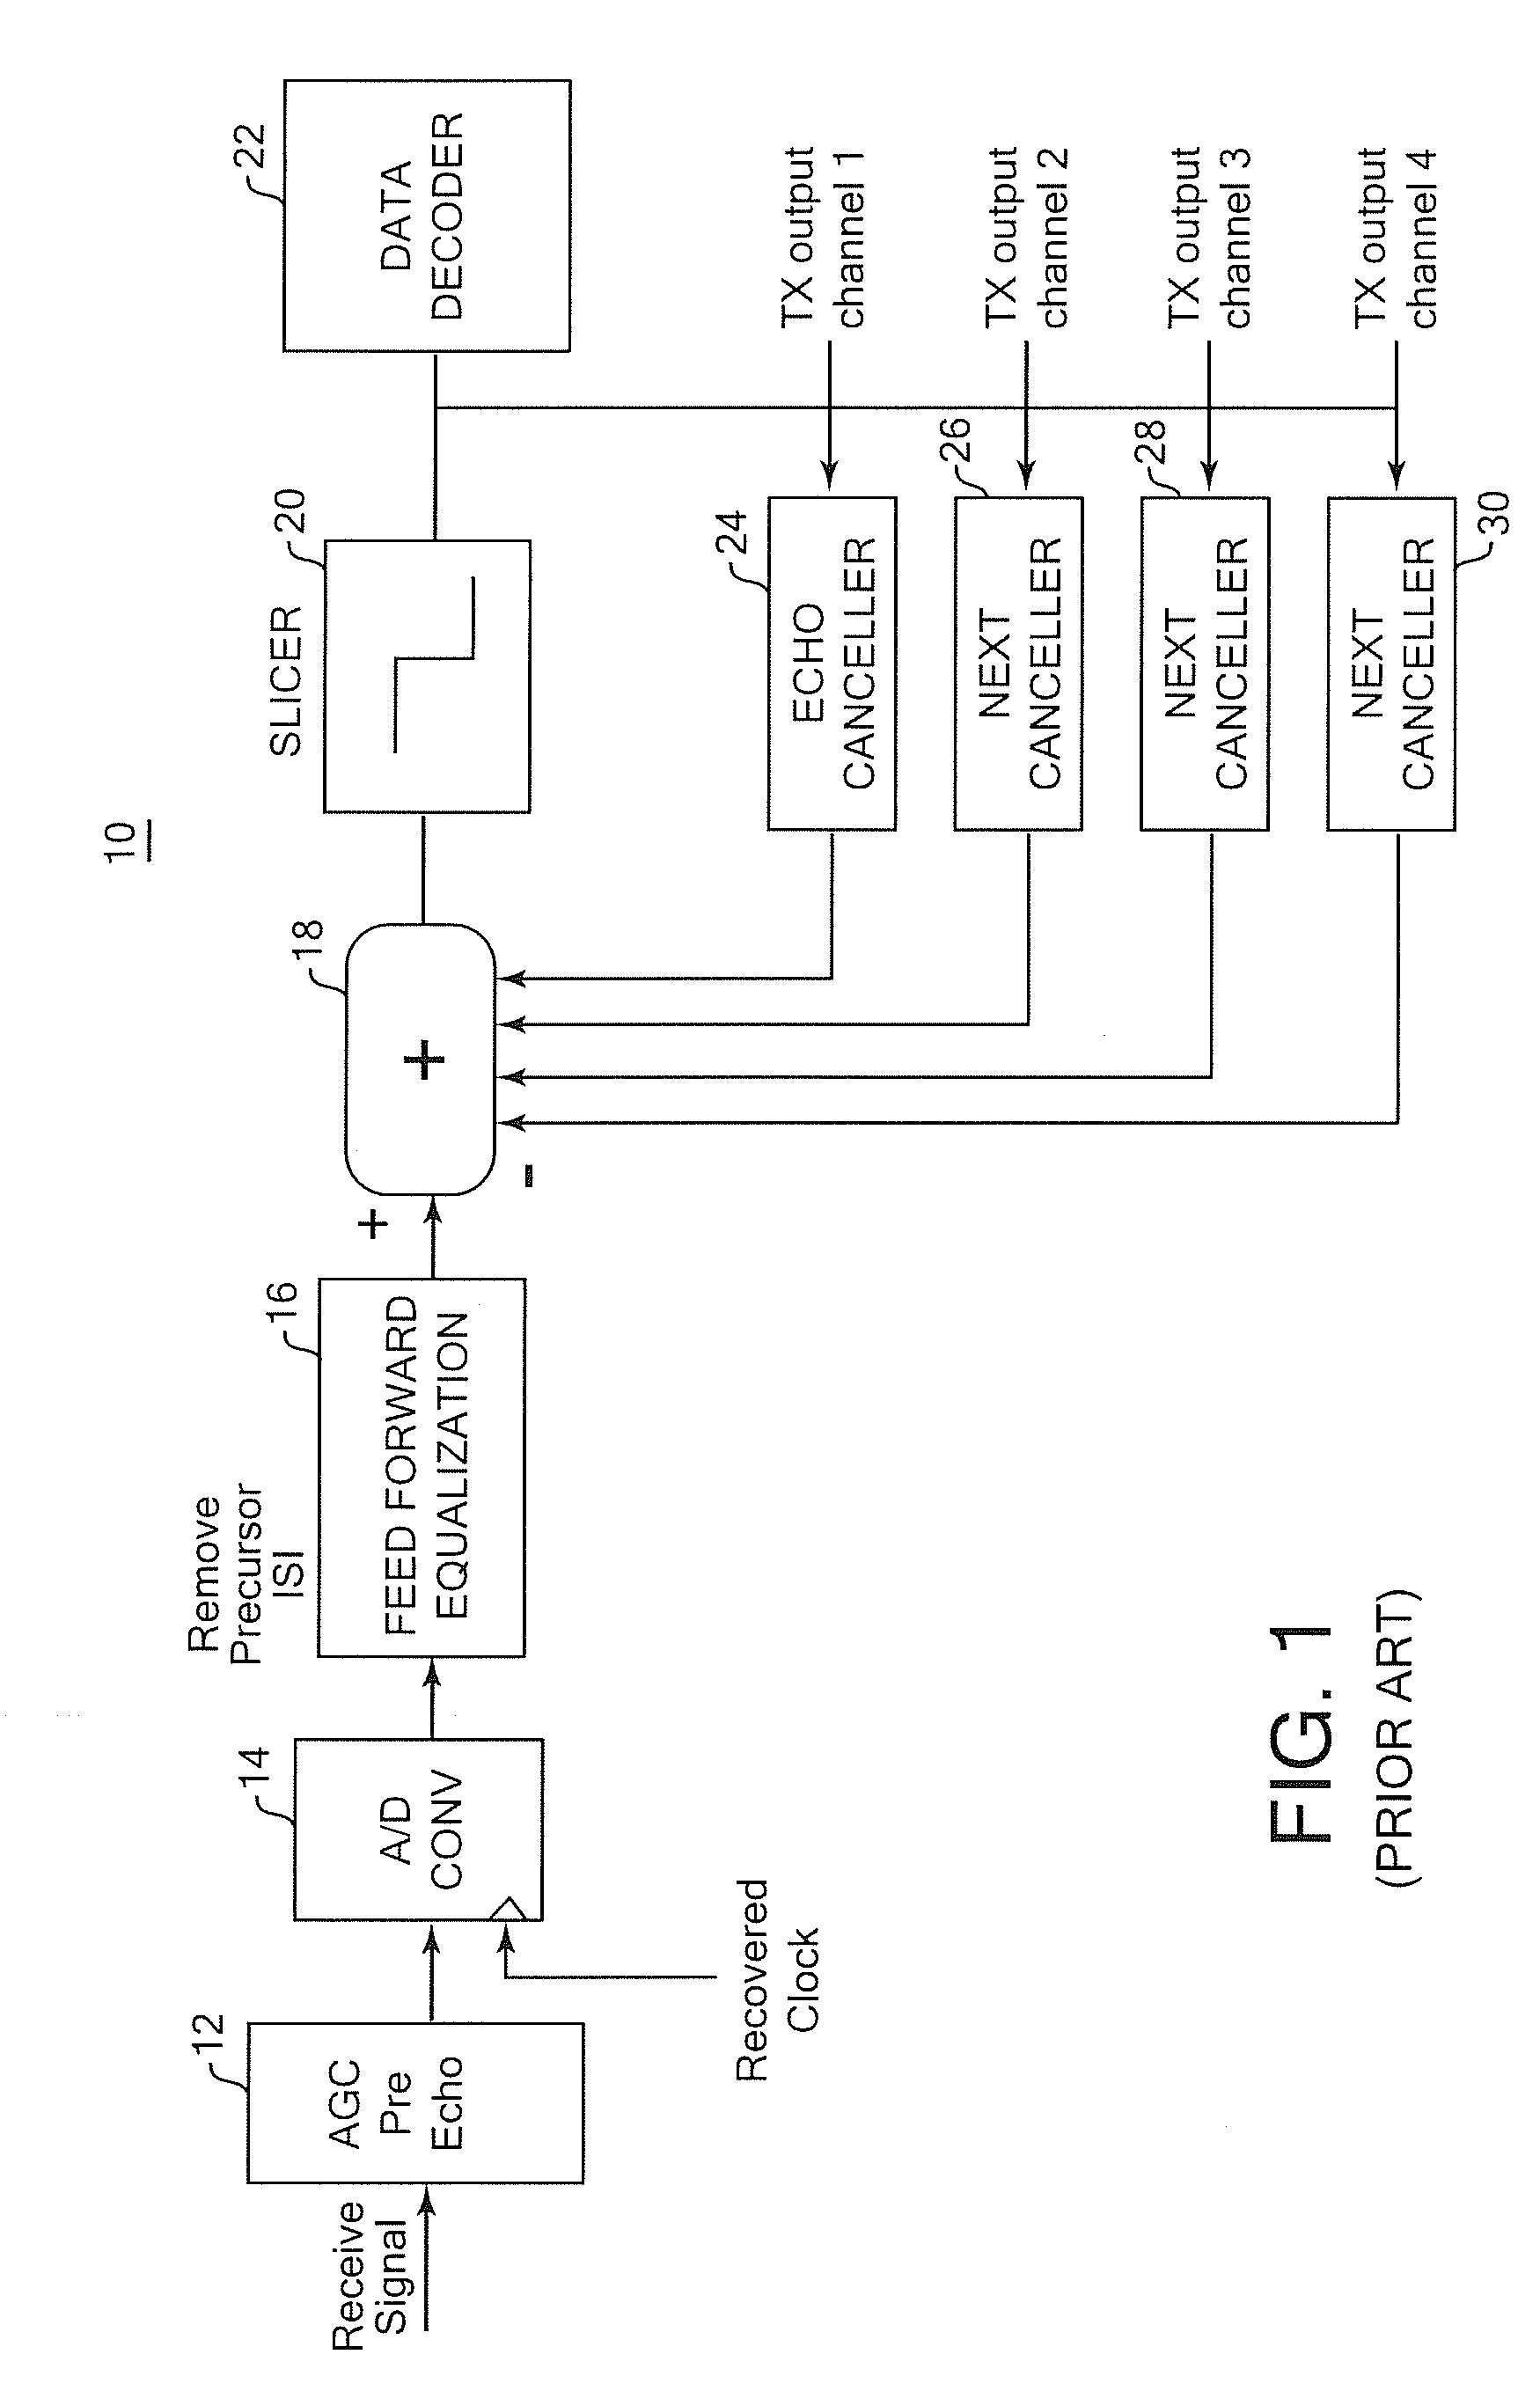 Low-power mixed-mode echo/crosstalk cancellation in wireline communications